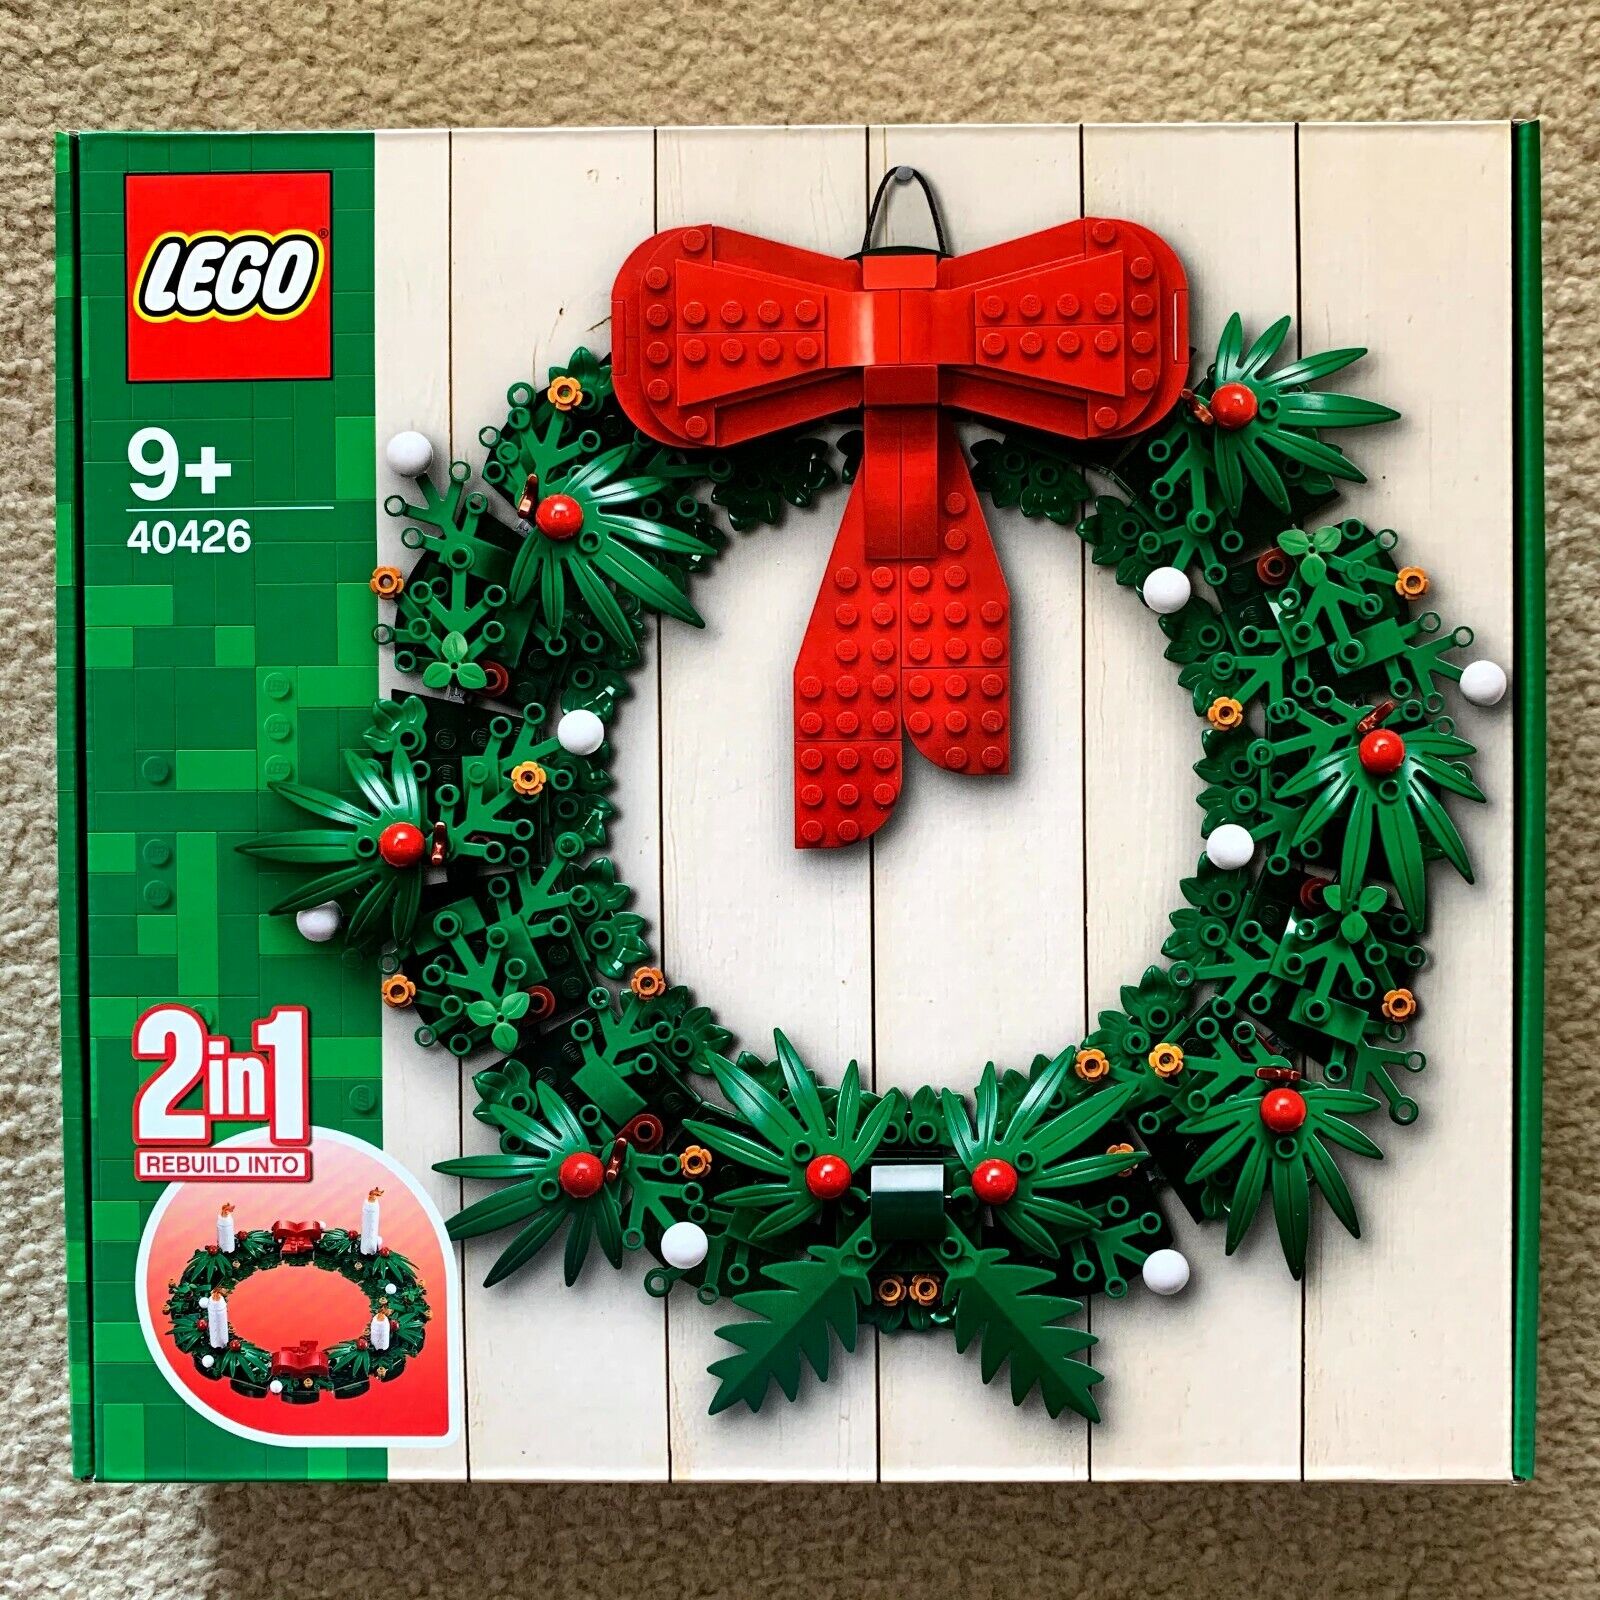 LEGO Christmas Wreath 2 in 1 40426 - New Sealed Hard to Find